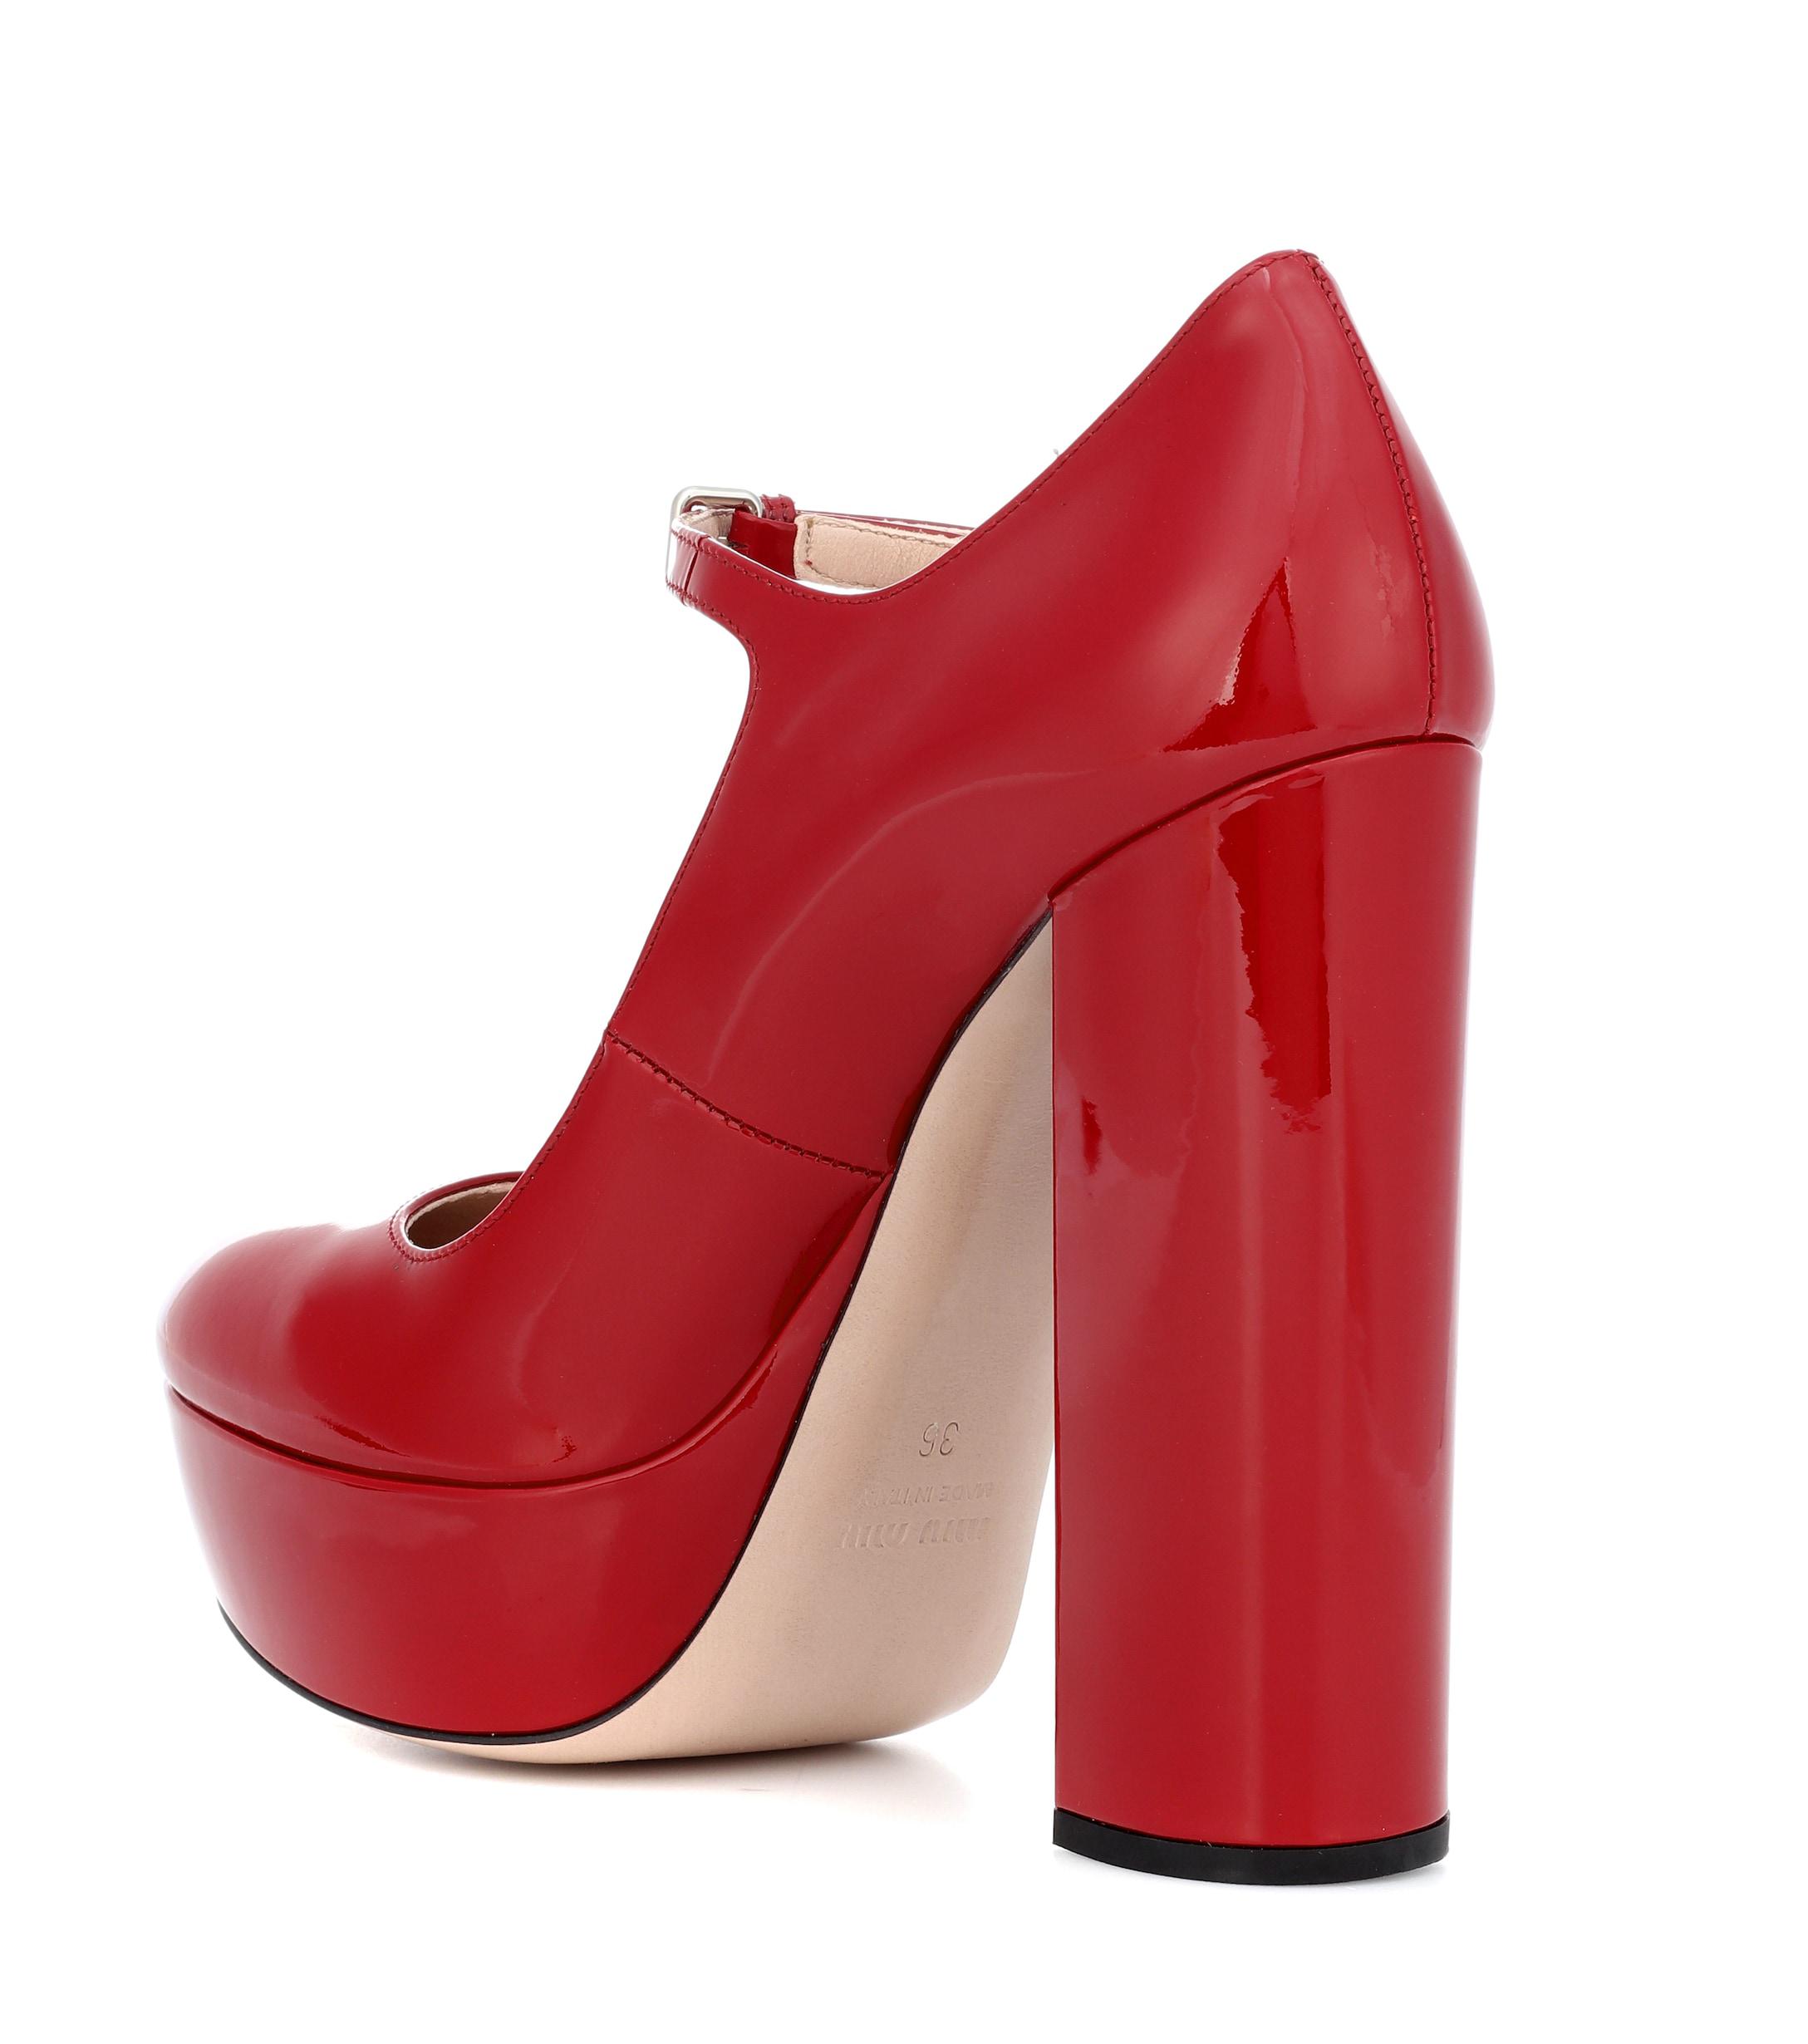 Miu Miu Leather Mary Jane Pumps in Red - Lyst